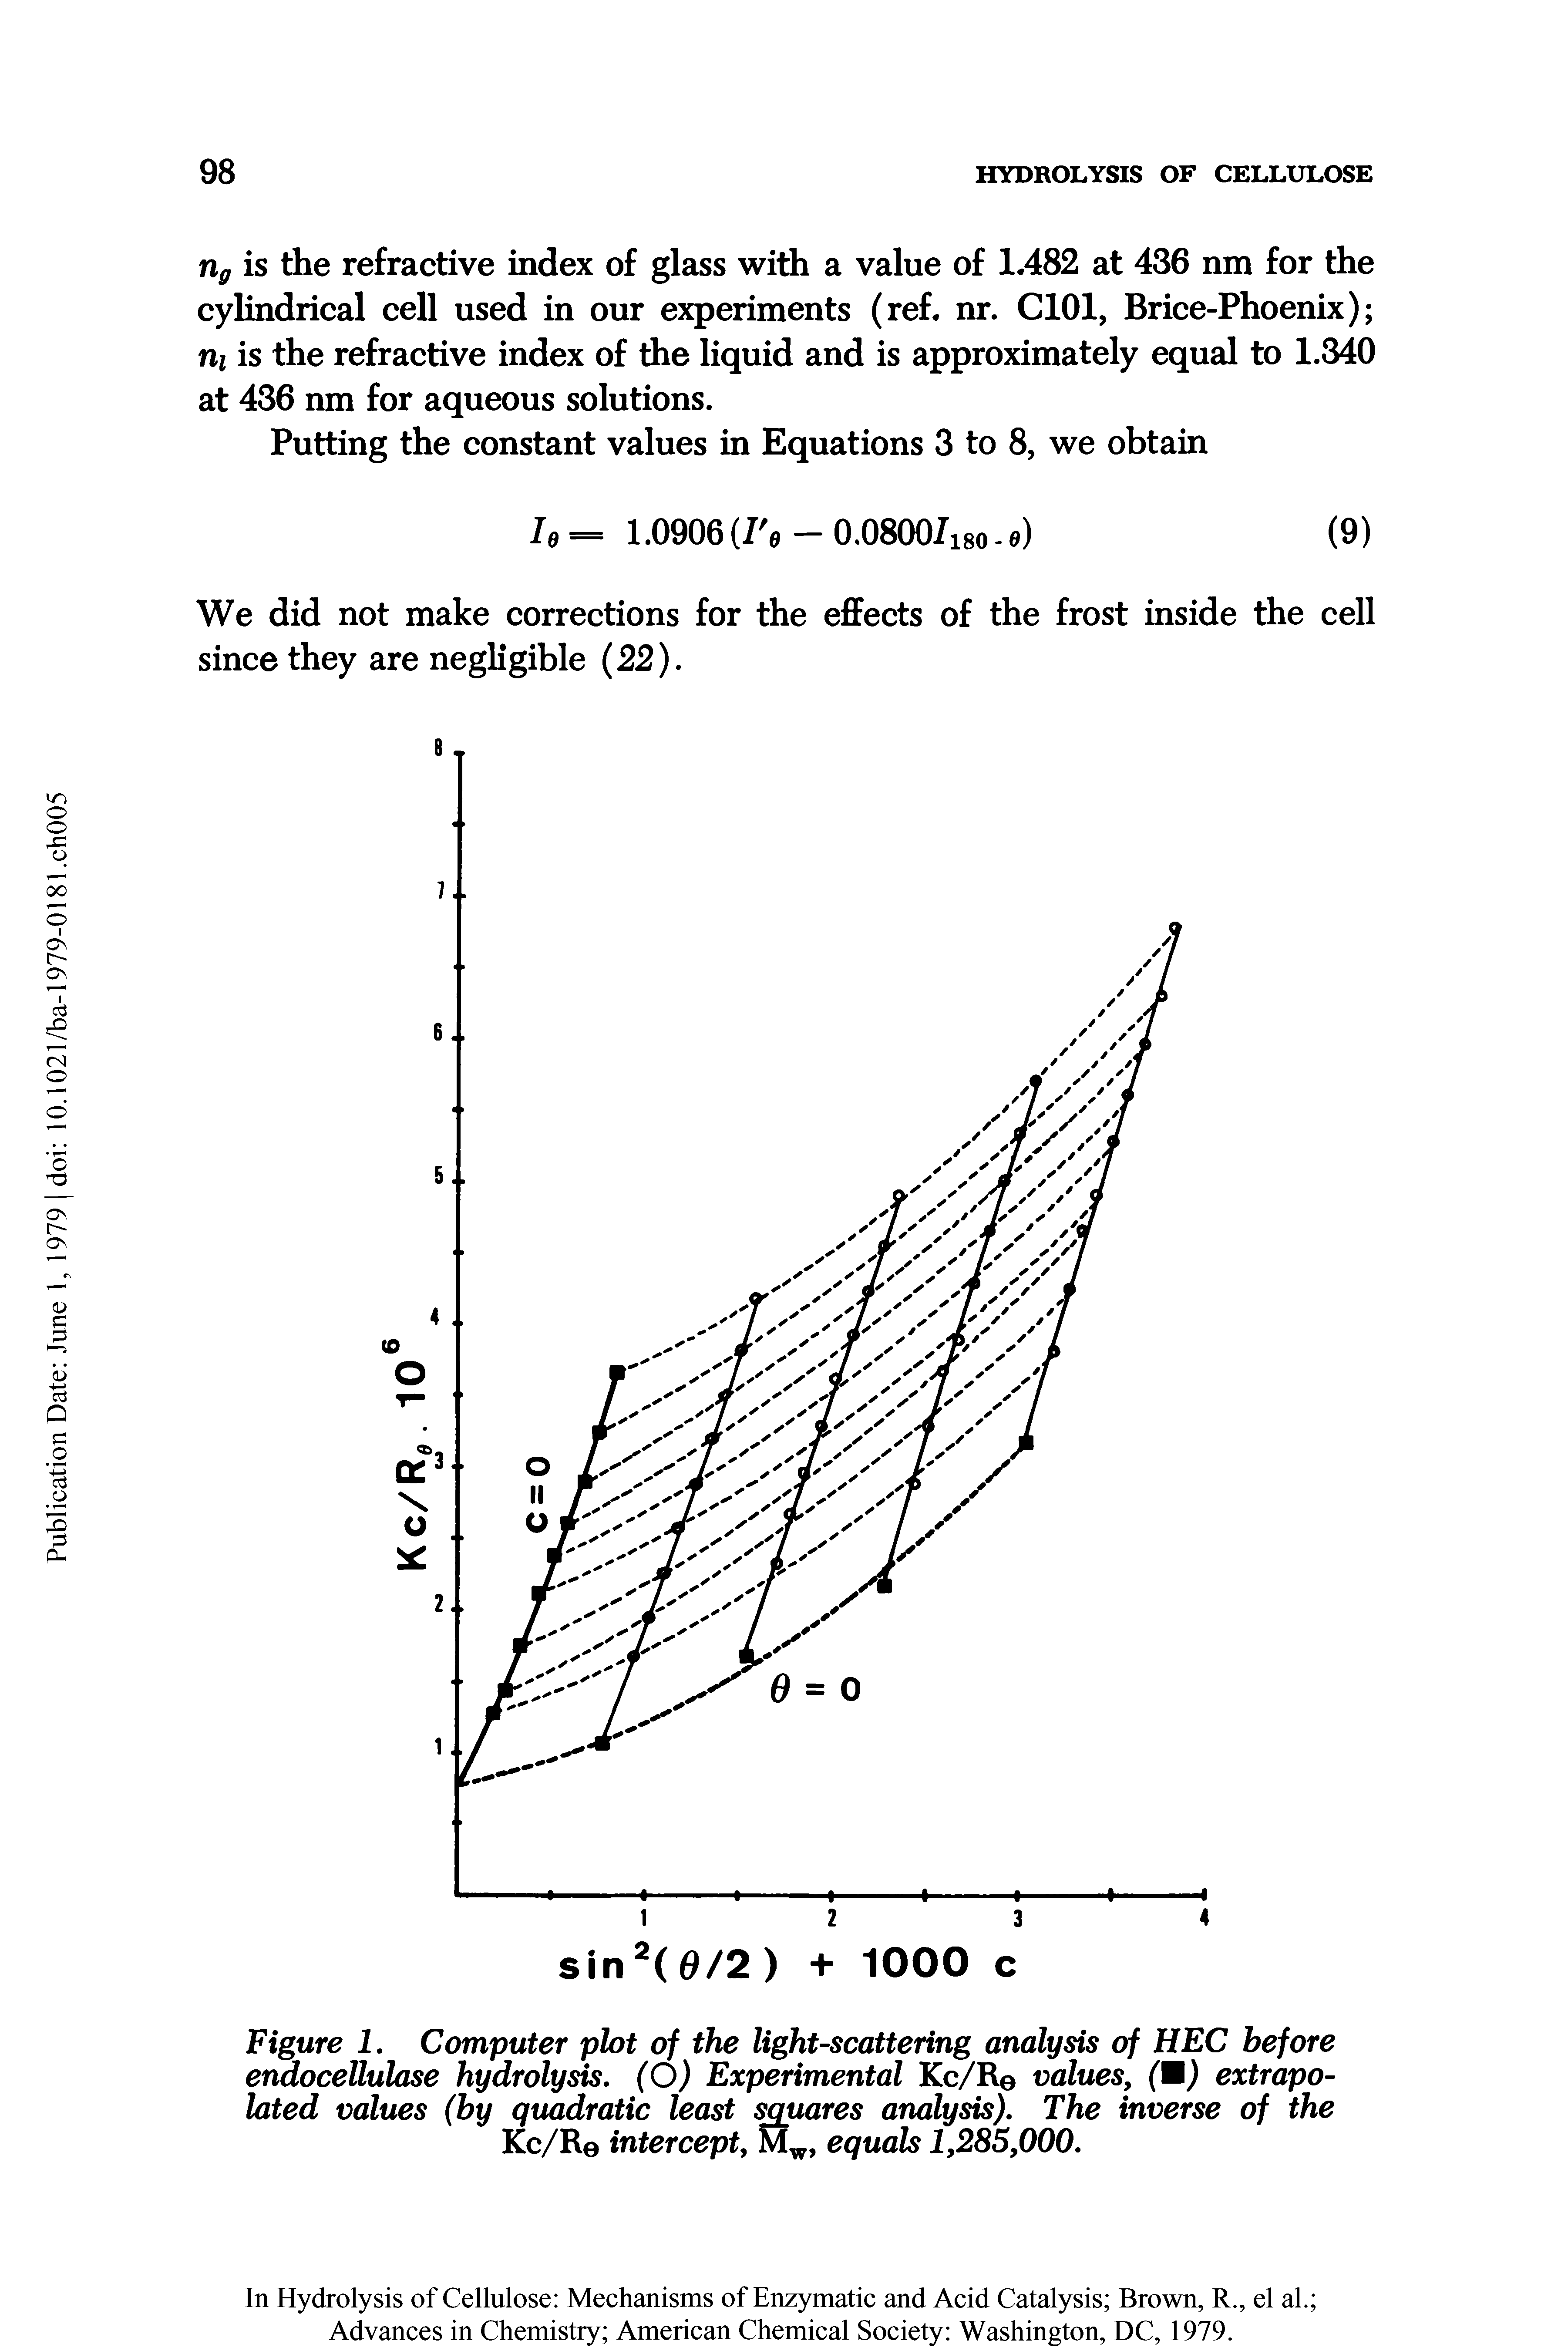 Figure 1. Computer plot of the light-scattering analysis of HEC before enaocellulase hydrolysis. (O) Experimental Kc/R values, (M) extrapolated values (by quadratic least squares analysis). The inverse of the Kc/Re intercept, Mw, equals 1,285,000.